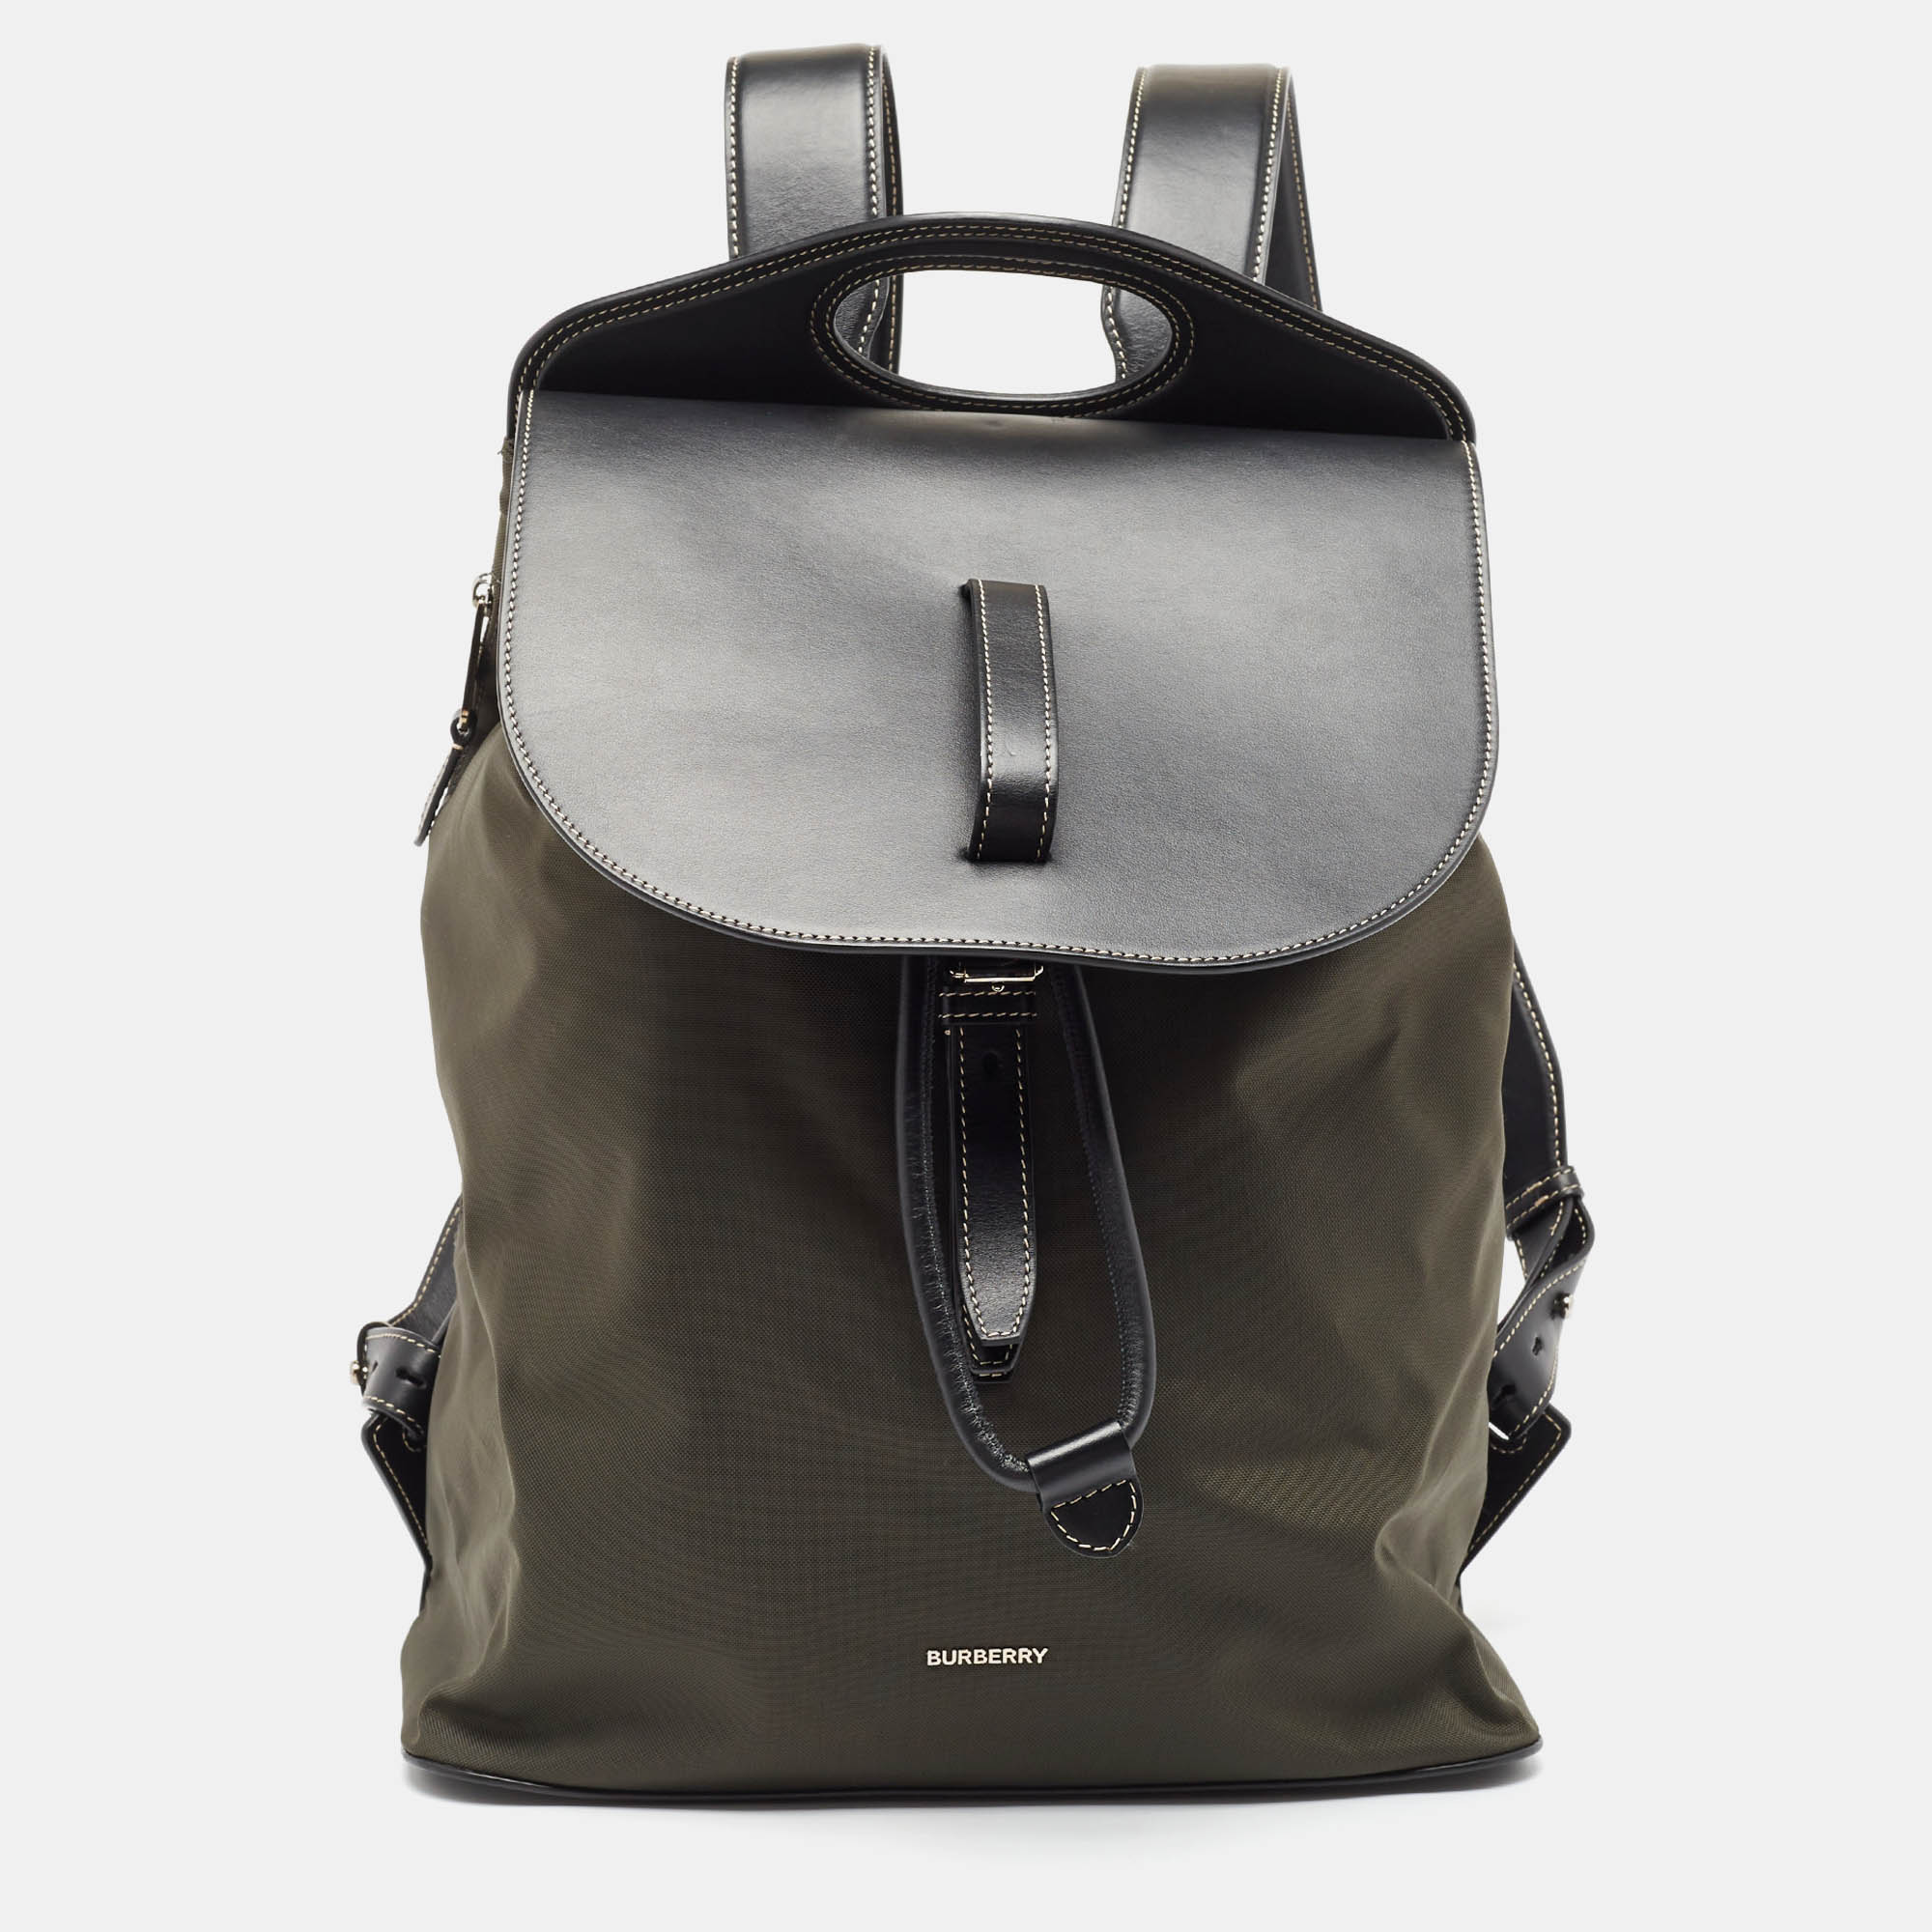 Burberry Black/Seaweed Nylon and Leather Pocket Backpack